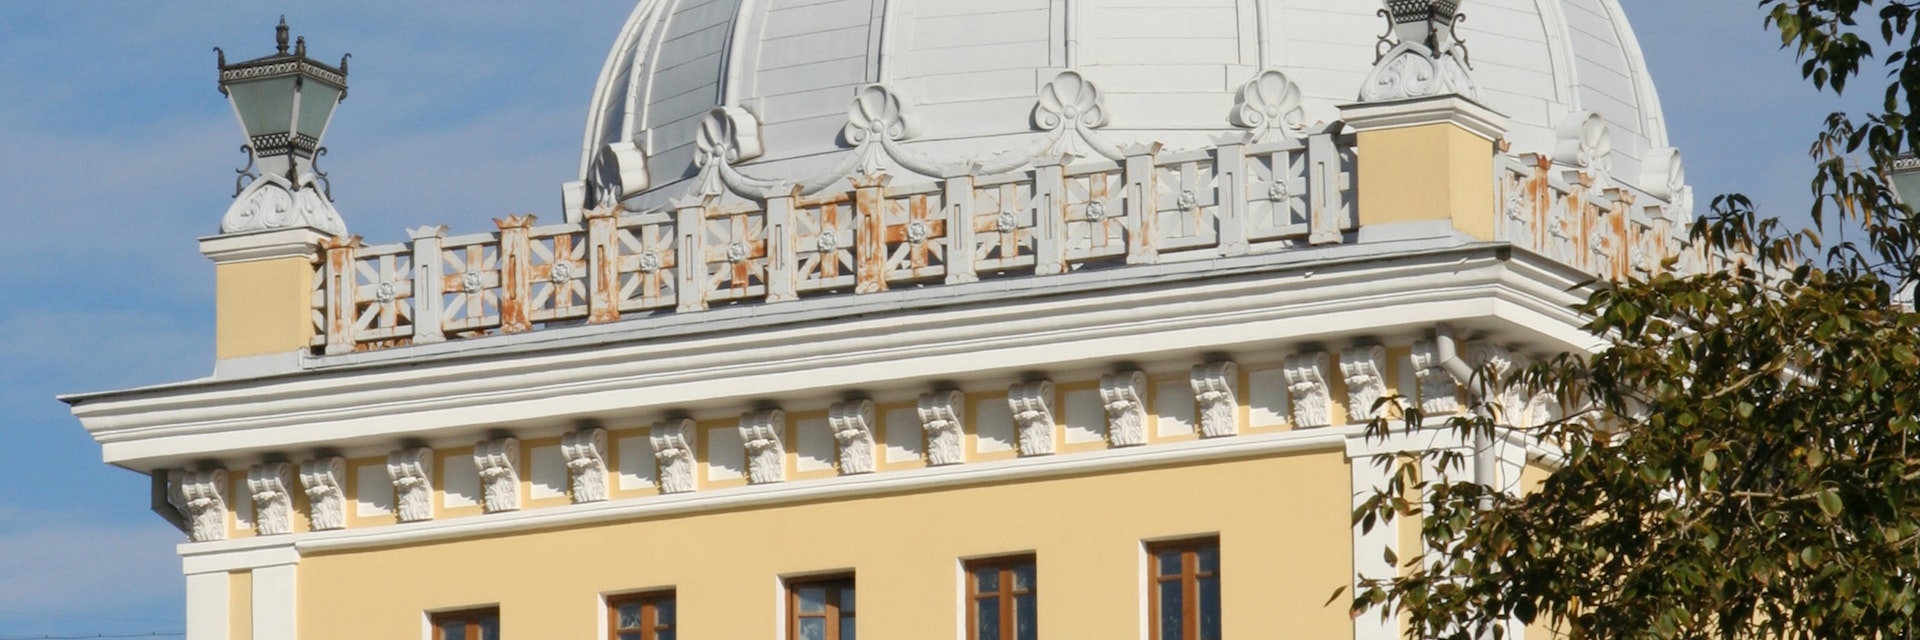 Exterior of Moscow Choral Synagogue.